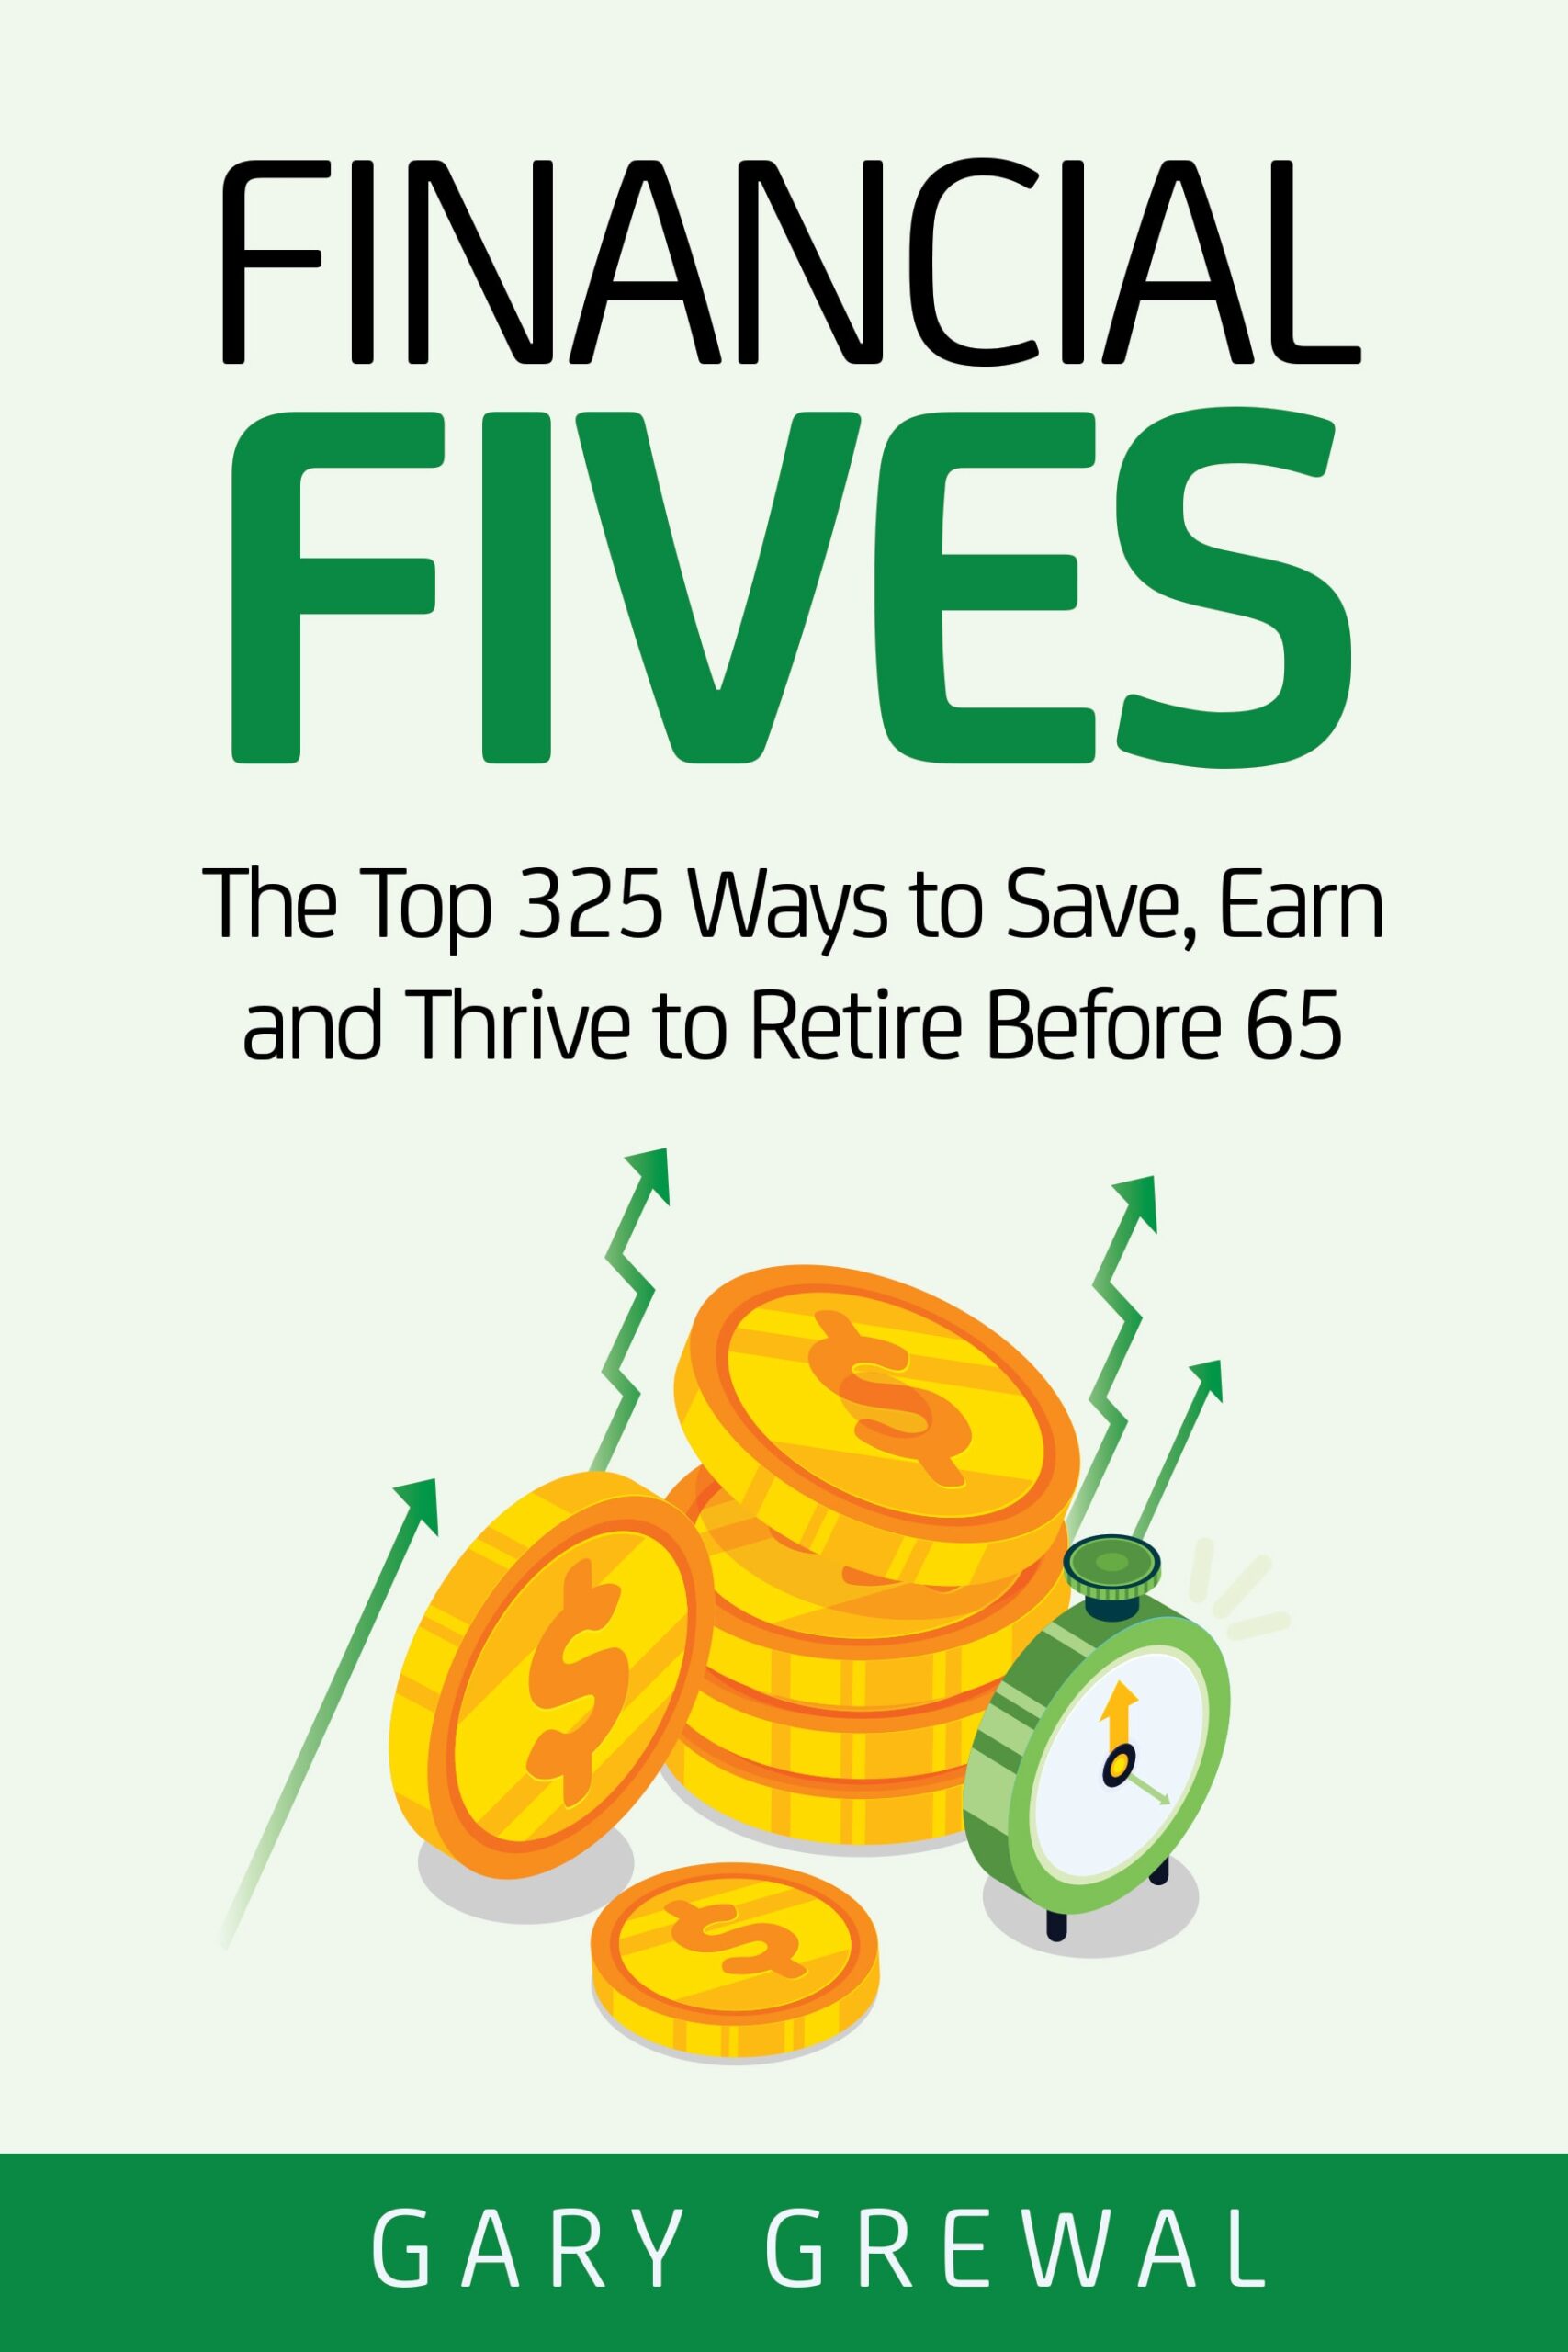 FREE: Financial Fives: The Top 325 Ways to Save, Earn, and Thrive to Retire Before 65 by Gary Grewal